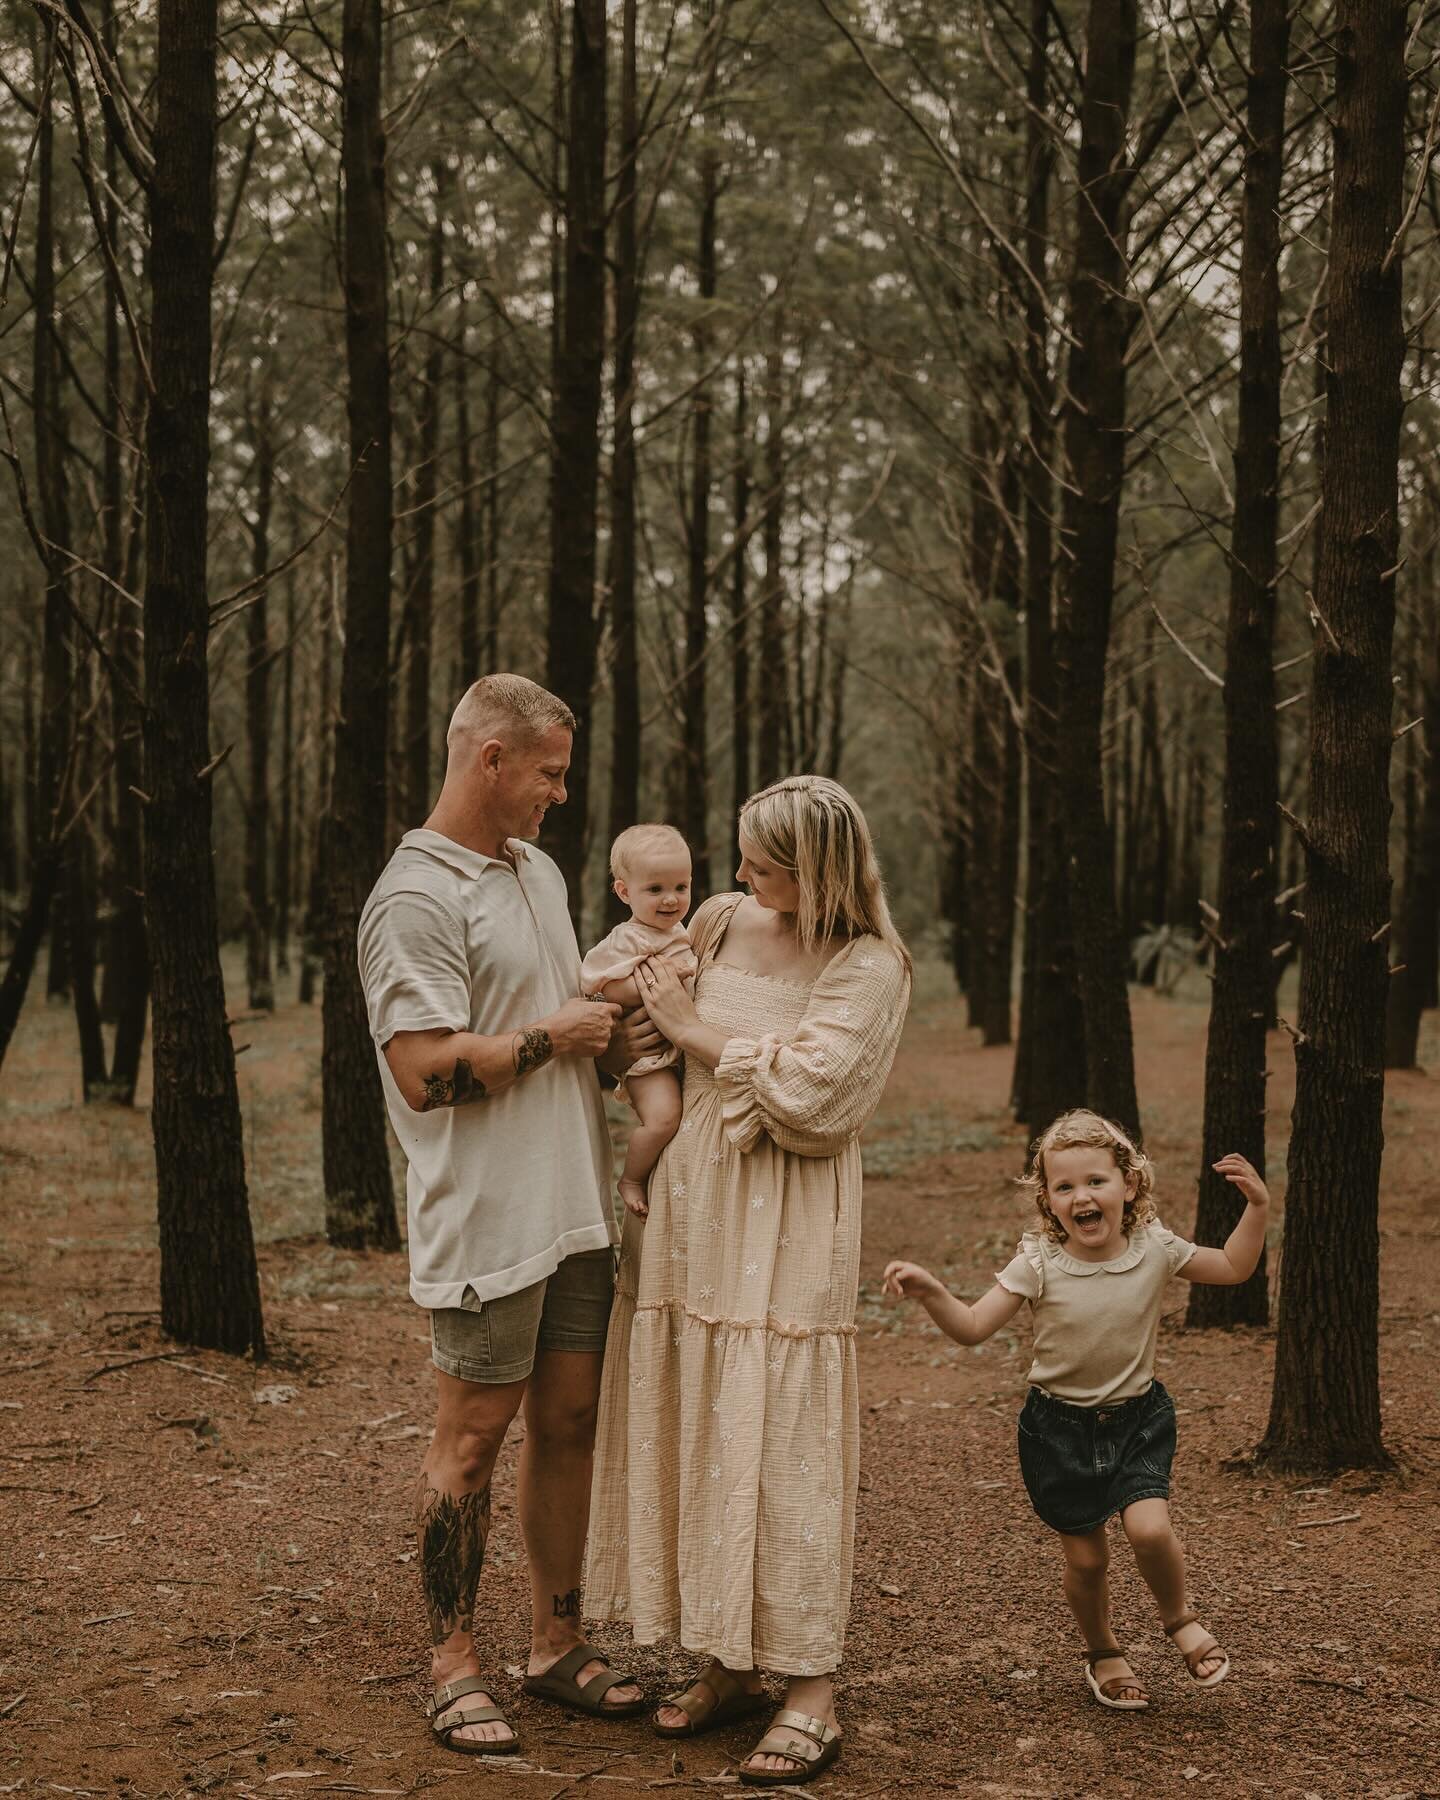 One of the really cool things about being a photographer is the repeat clients who value the yearly photos, and seeing just how much their family has changed and grown. I feel so lucky to be invited to capture memories for this family again 🥰😍 this